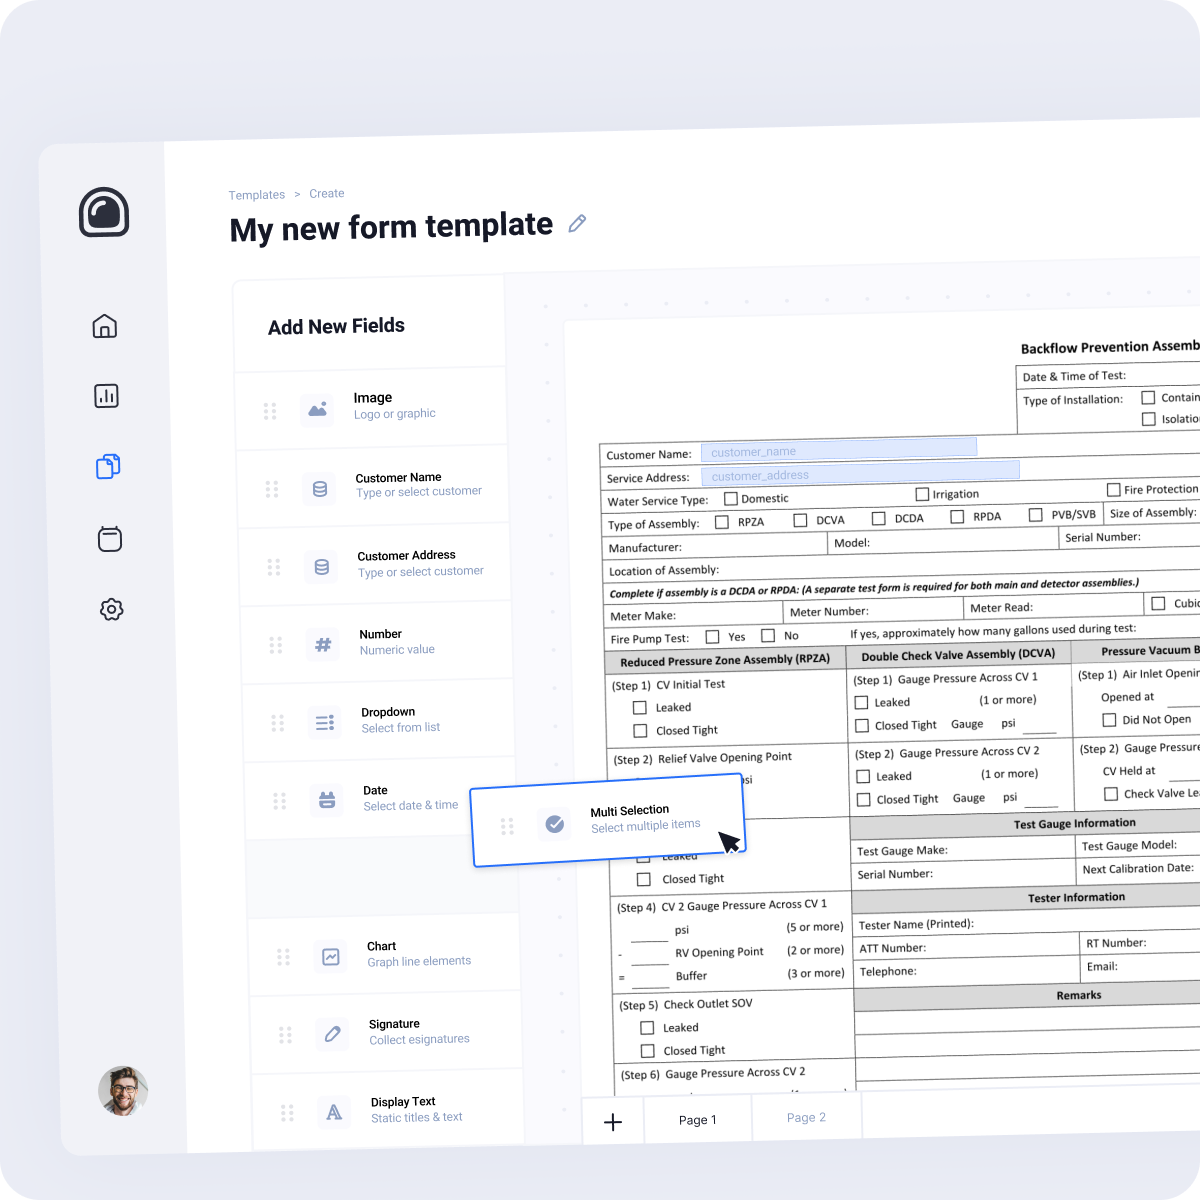 Compliance Forms SDK